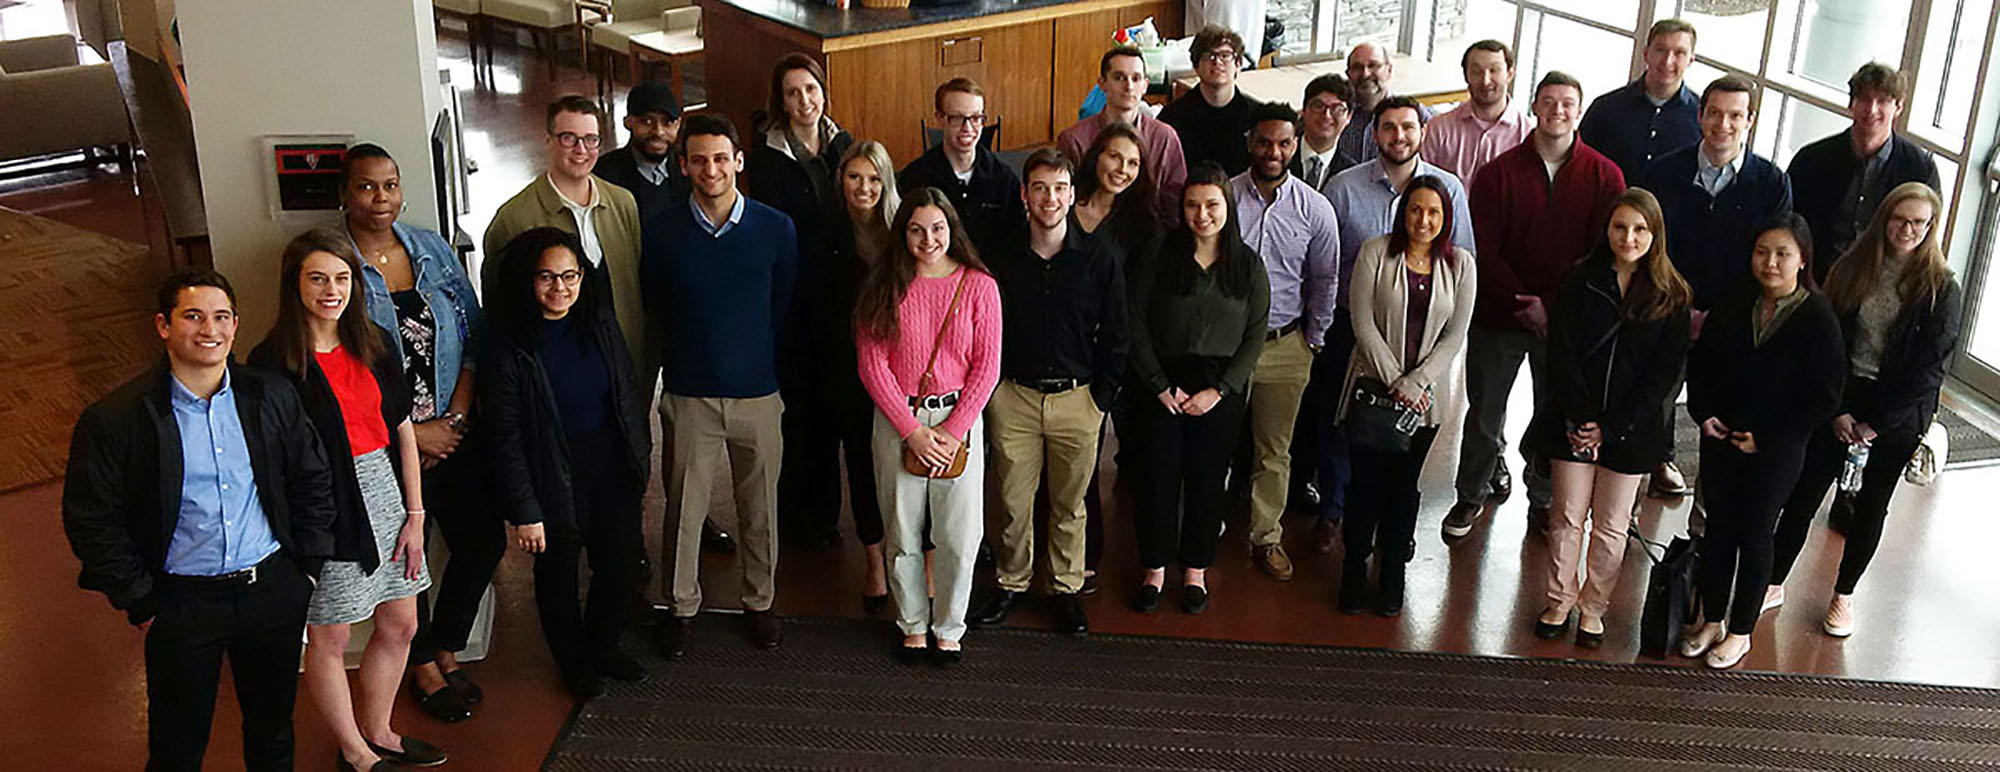 More than 60 students in Youngstown State University’s Williamson College of Business Administration participated in management field visits to Parker Hannifin, Nestle Professional and Goodyear during this past Spring semester.